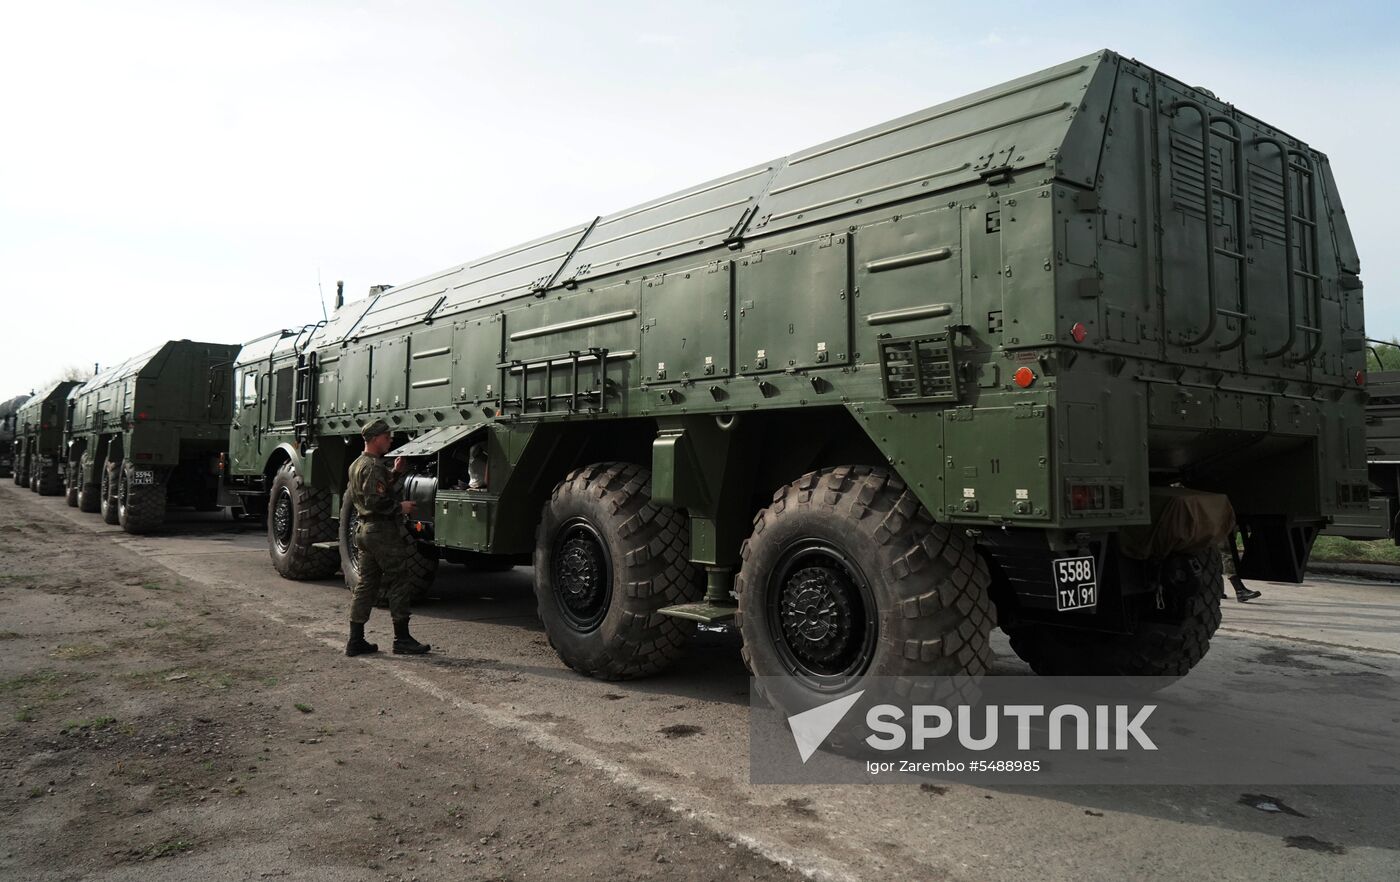 Preparation of military equipment for Victory Day Parade in Kaliningrad